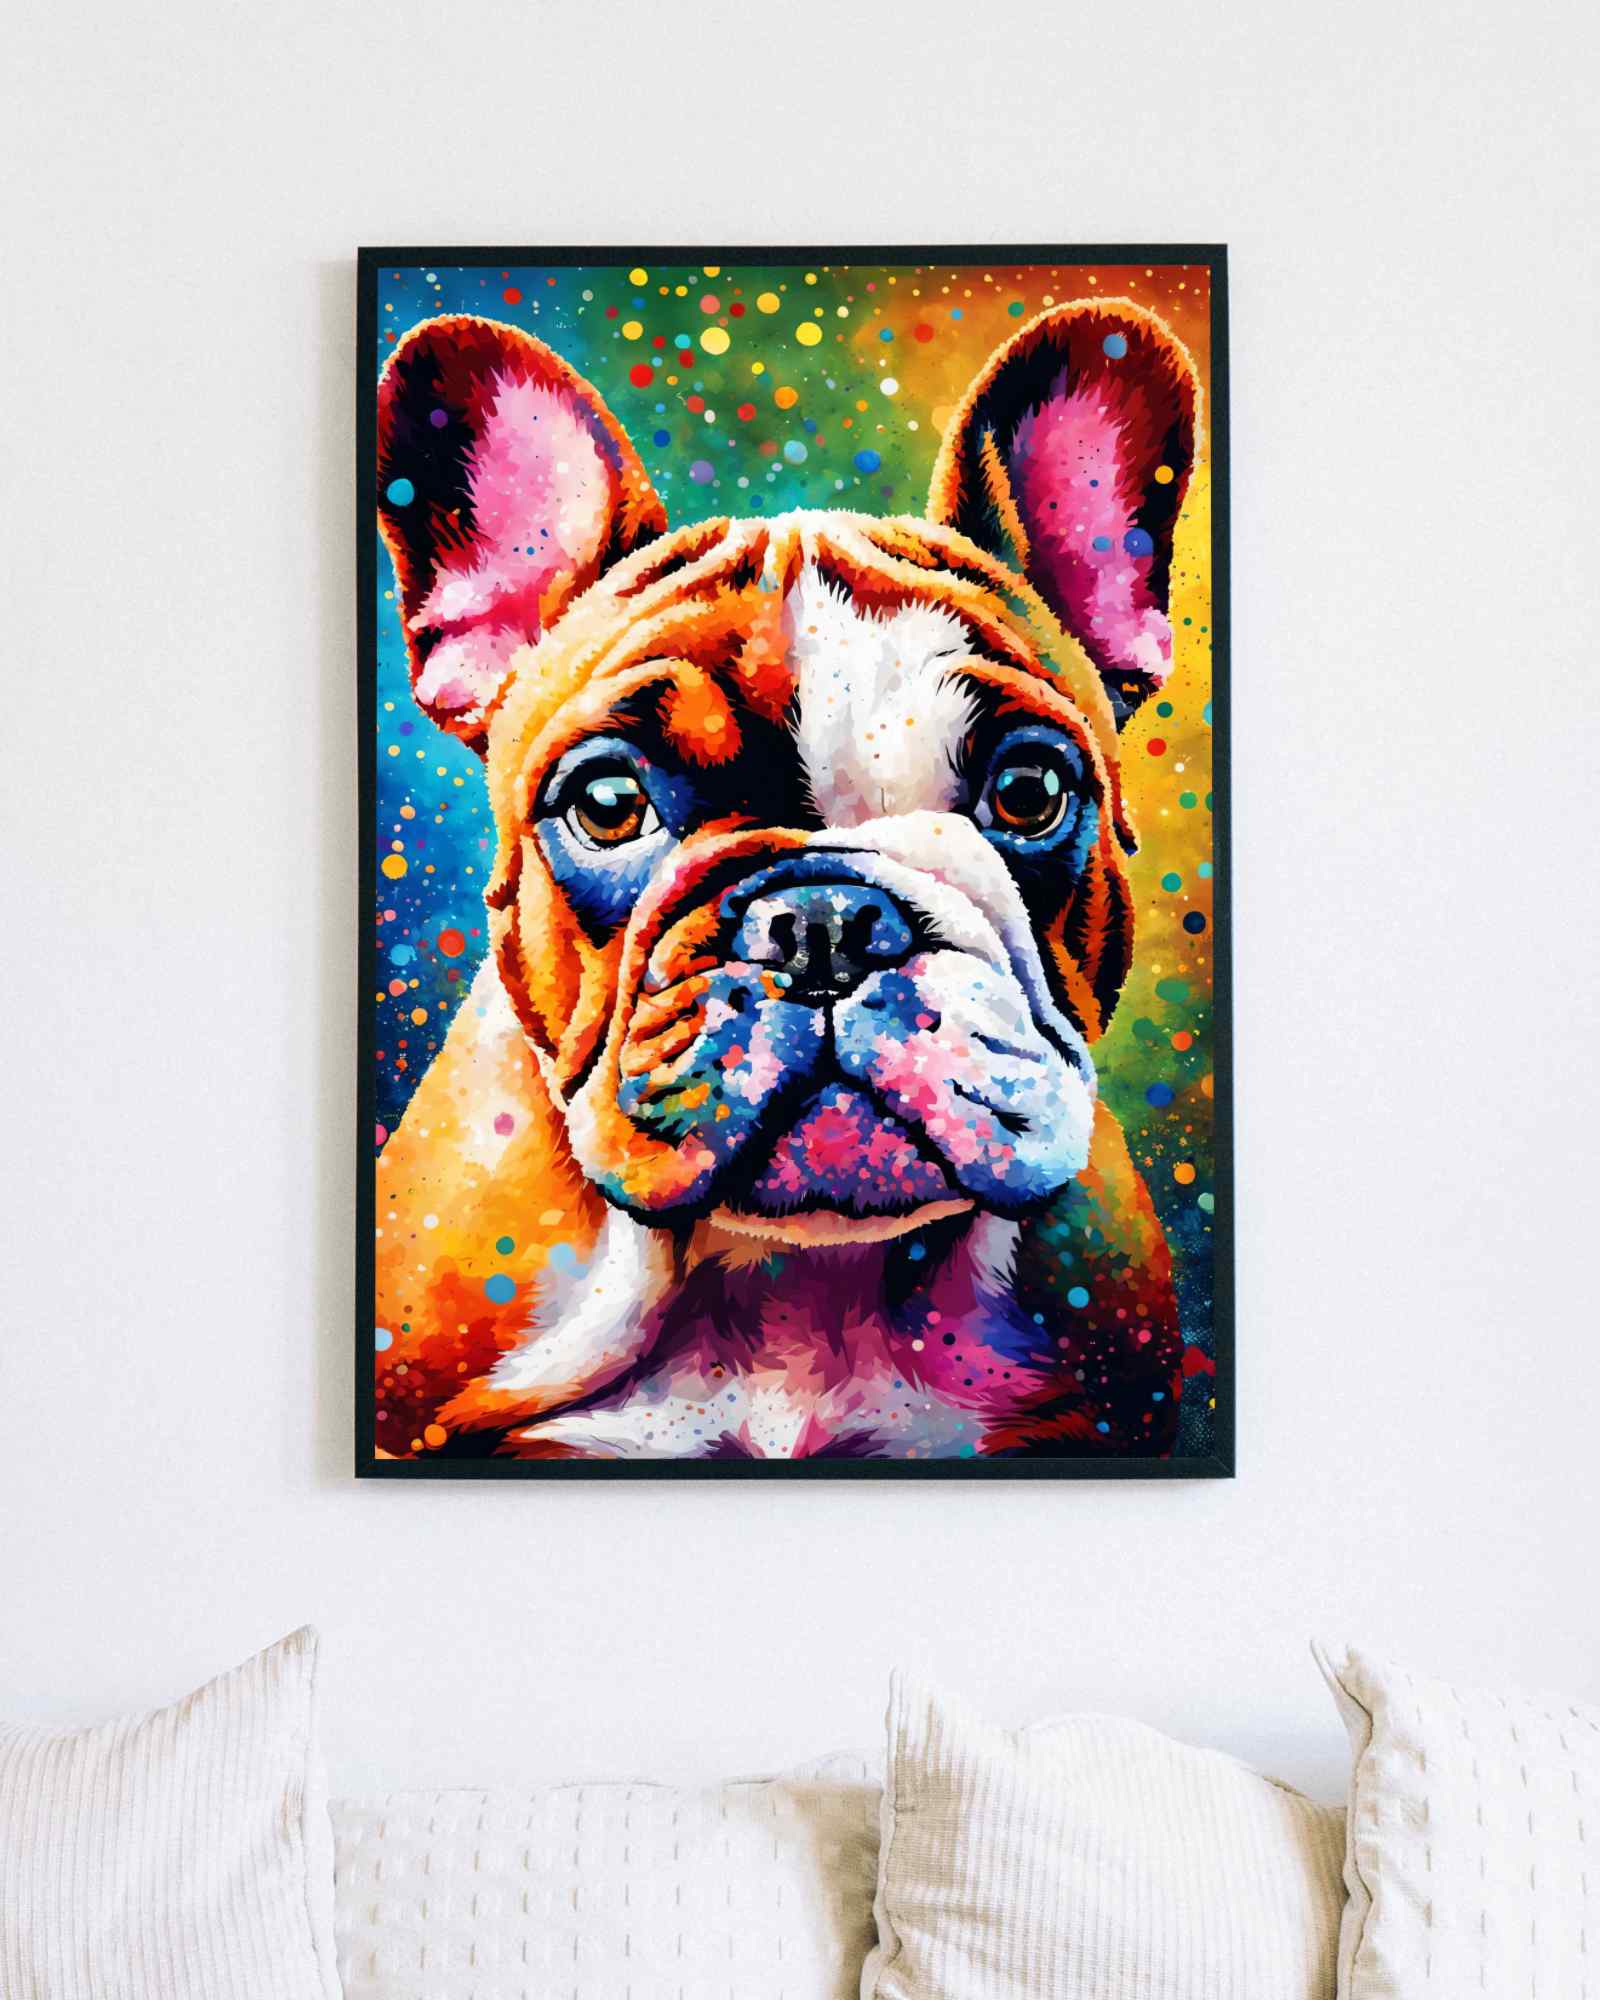 Cuddle buddy - Poster - Ever colorful